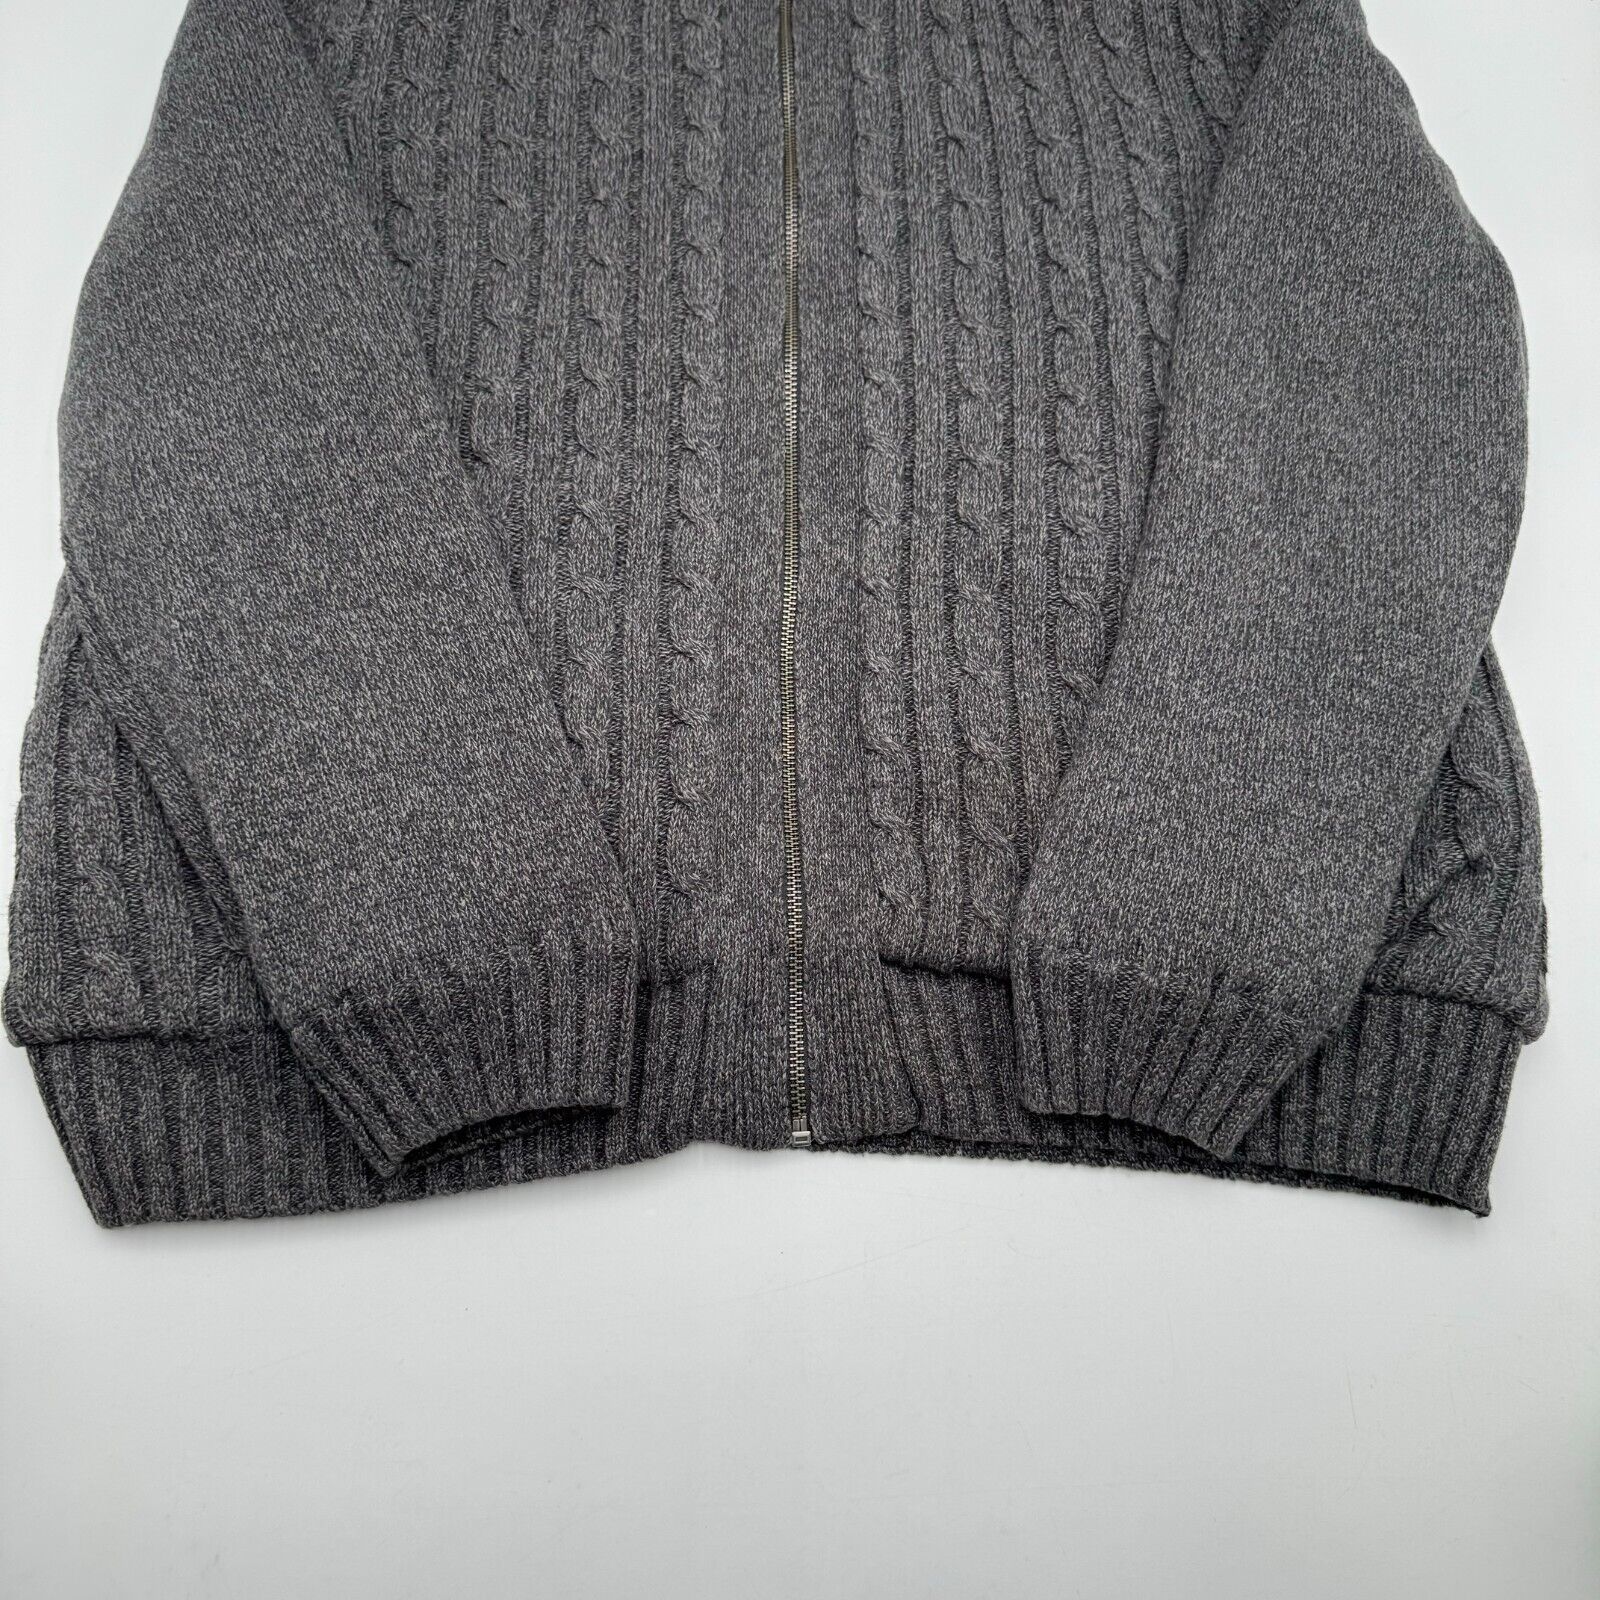 Boston Traders Cardigan Sweater Gray Cable Knit Fleece Lined Full Zip Mens XXL